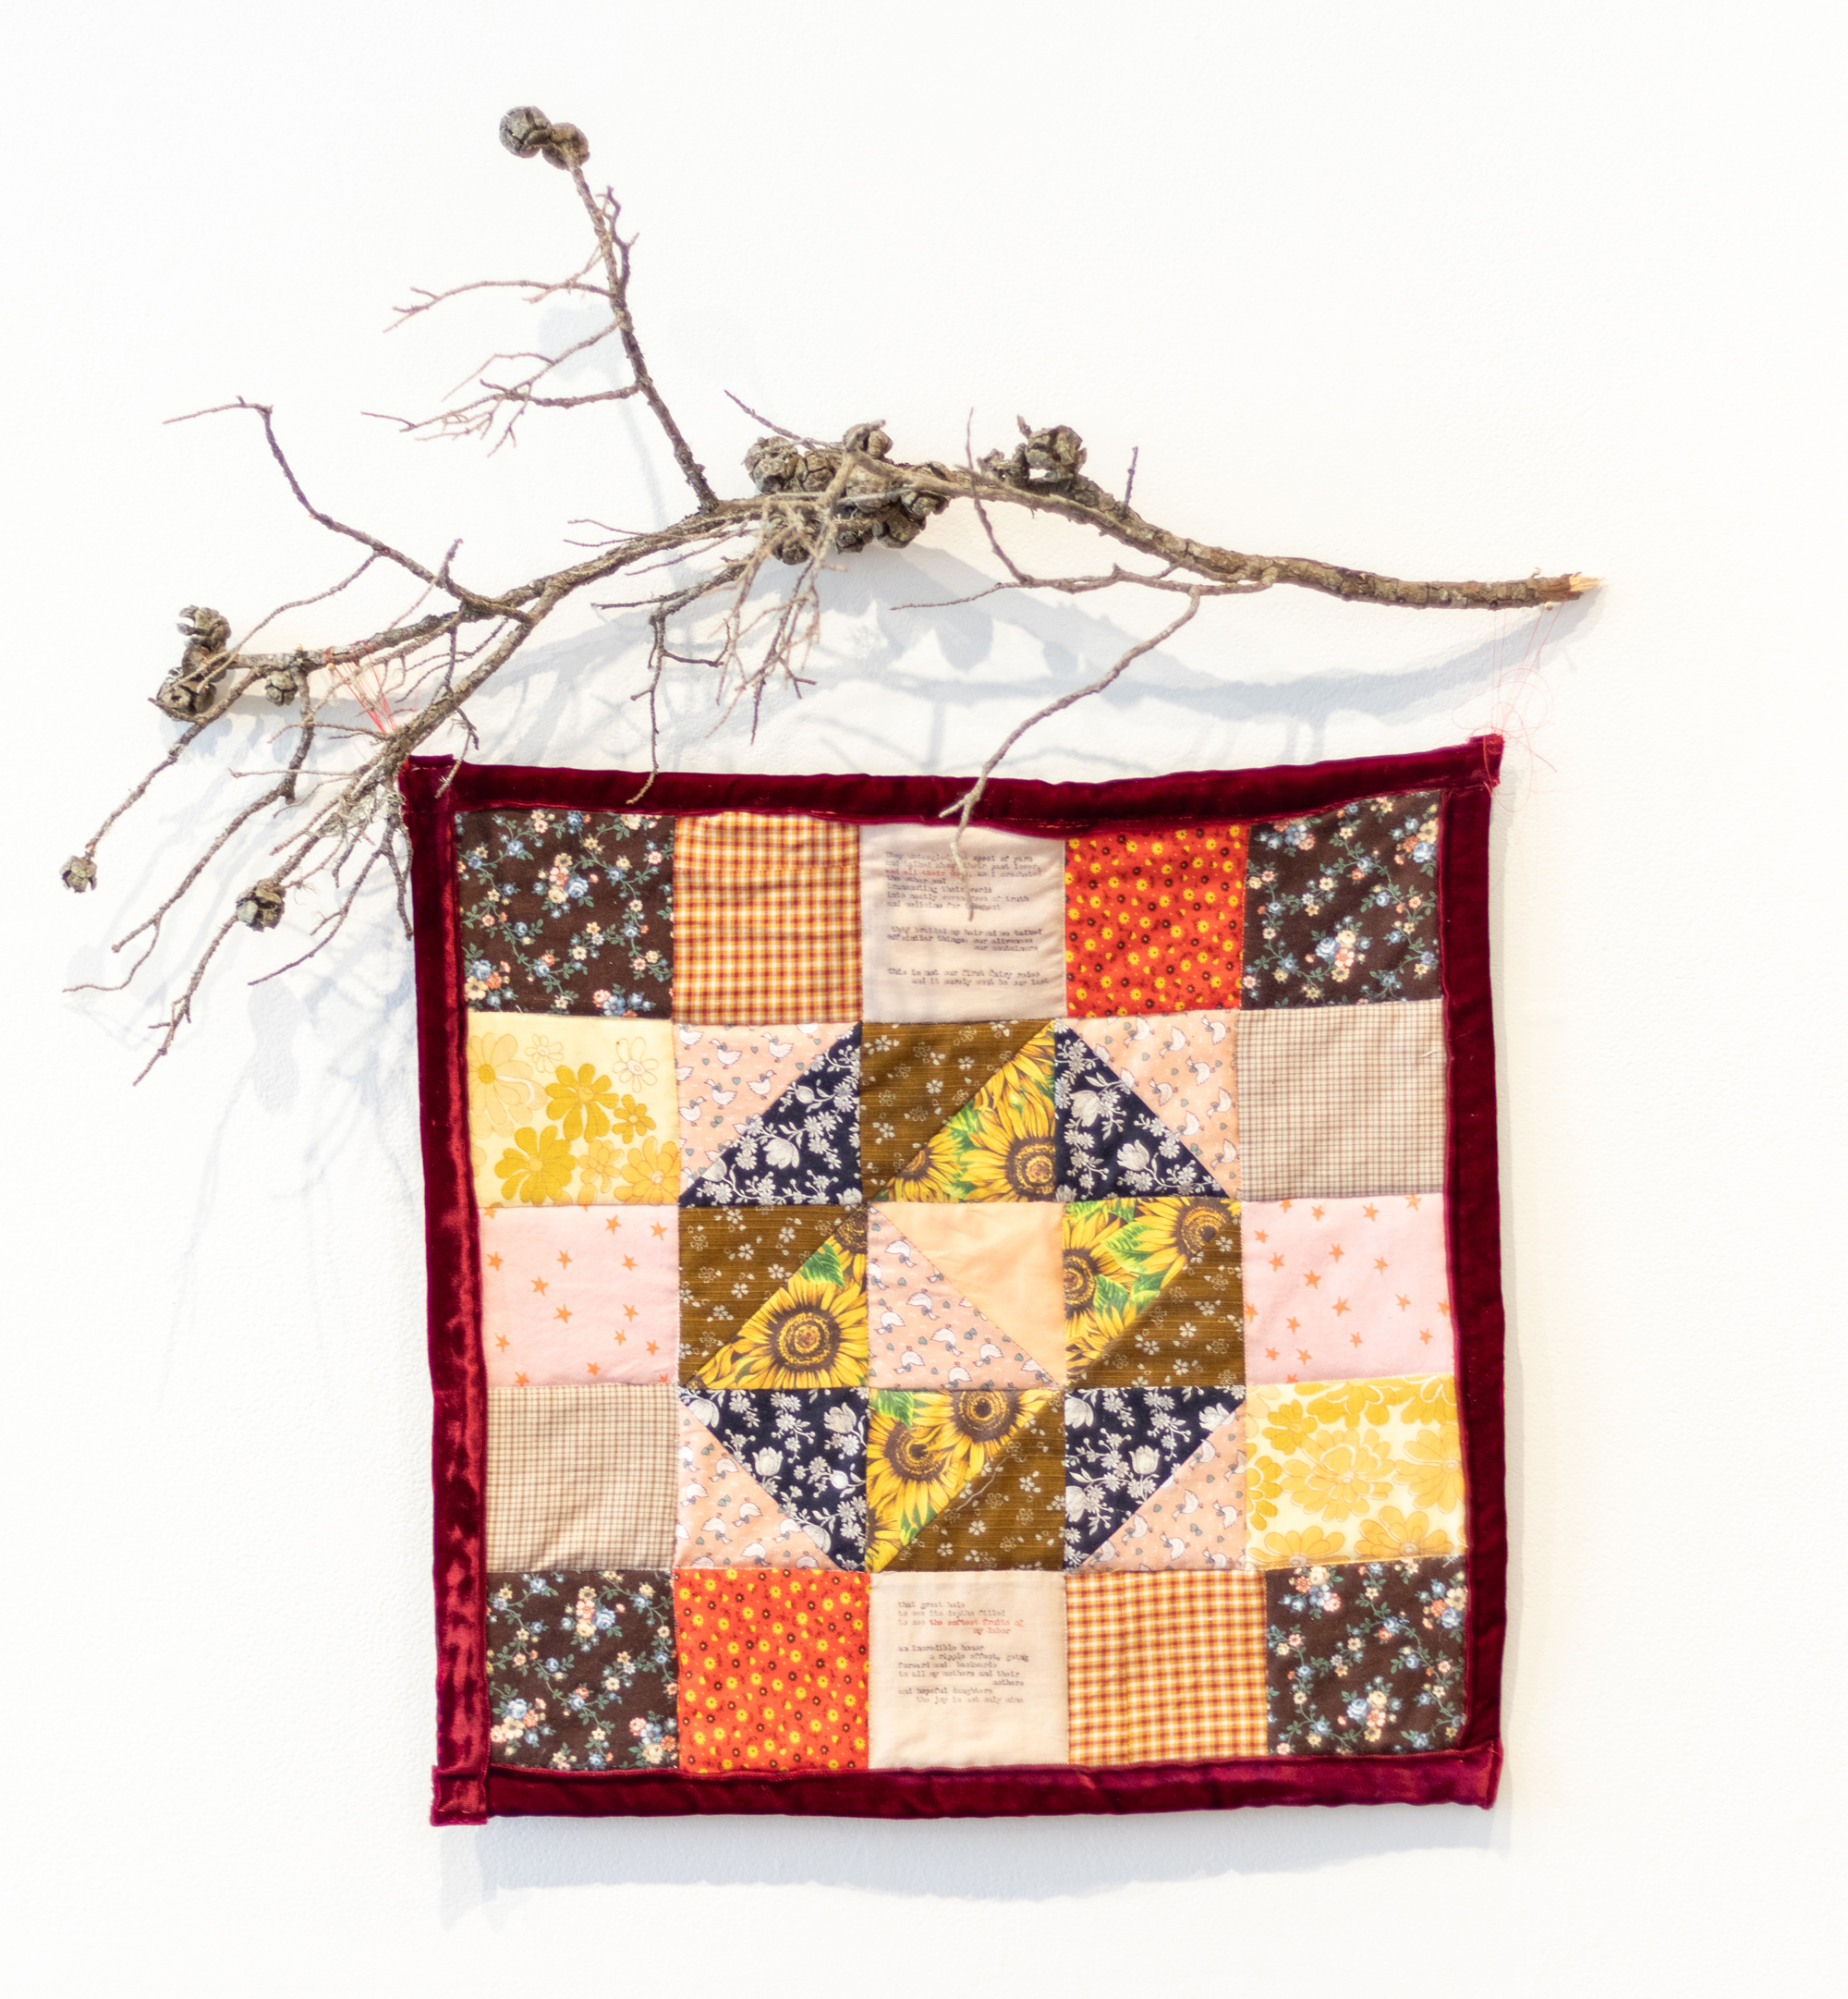 Quilted textile work with dried branch hanging above